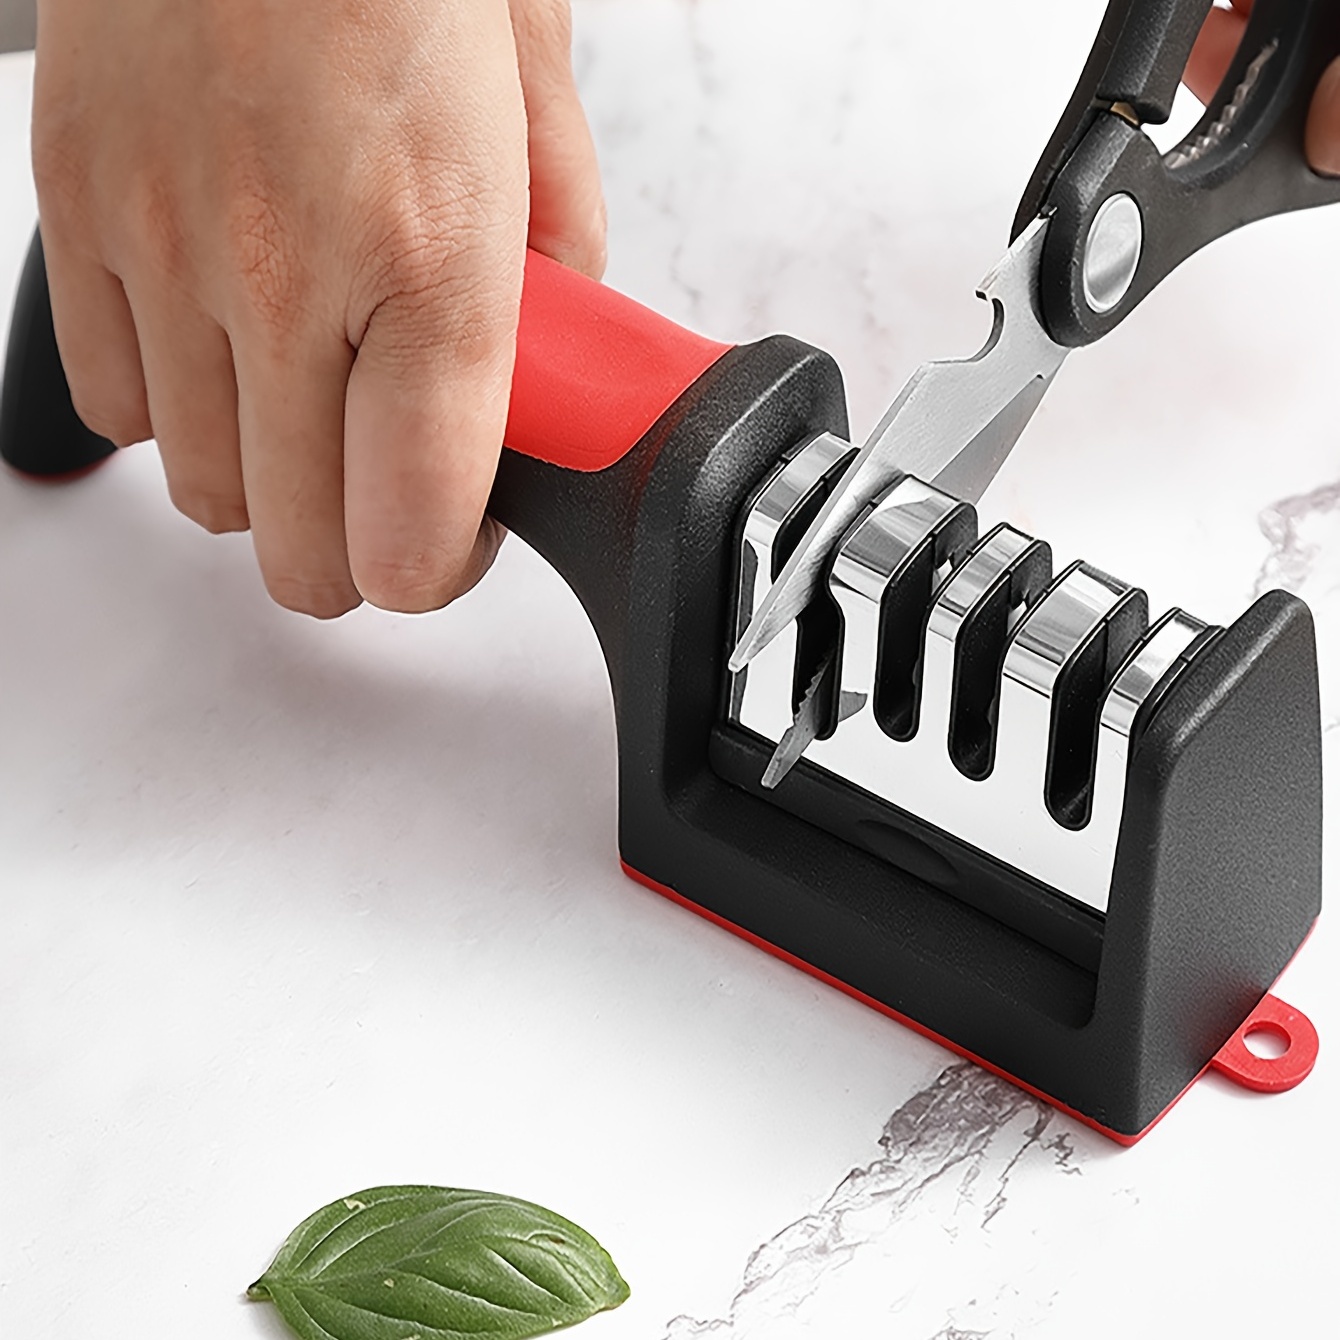 4-Level Multifunctional Kitchen Knife Sharpener - Stainless Steel  Sharpening Machine For Perfectly Sharpened Blades